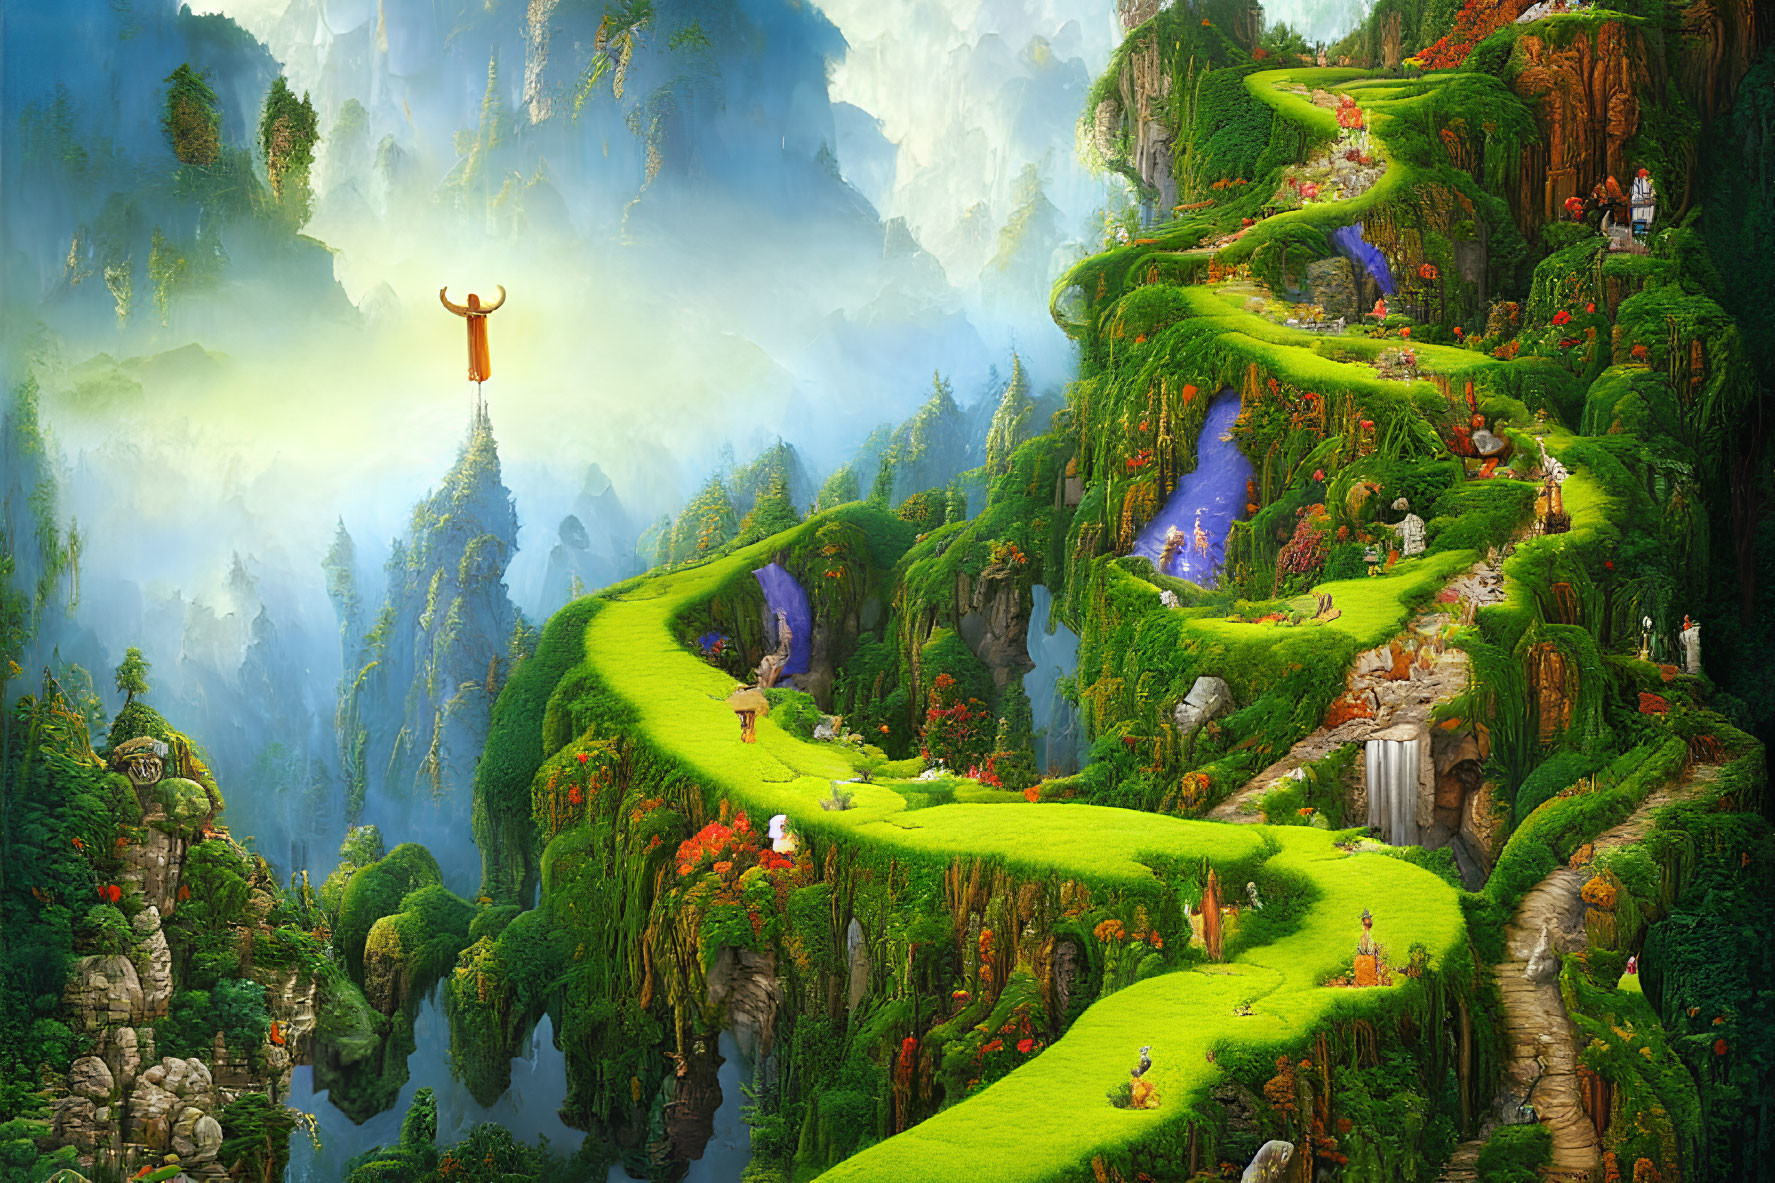 Fantasy landscape with winding pathways, waterfalls, lush greenery, and mysterious structure